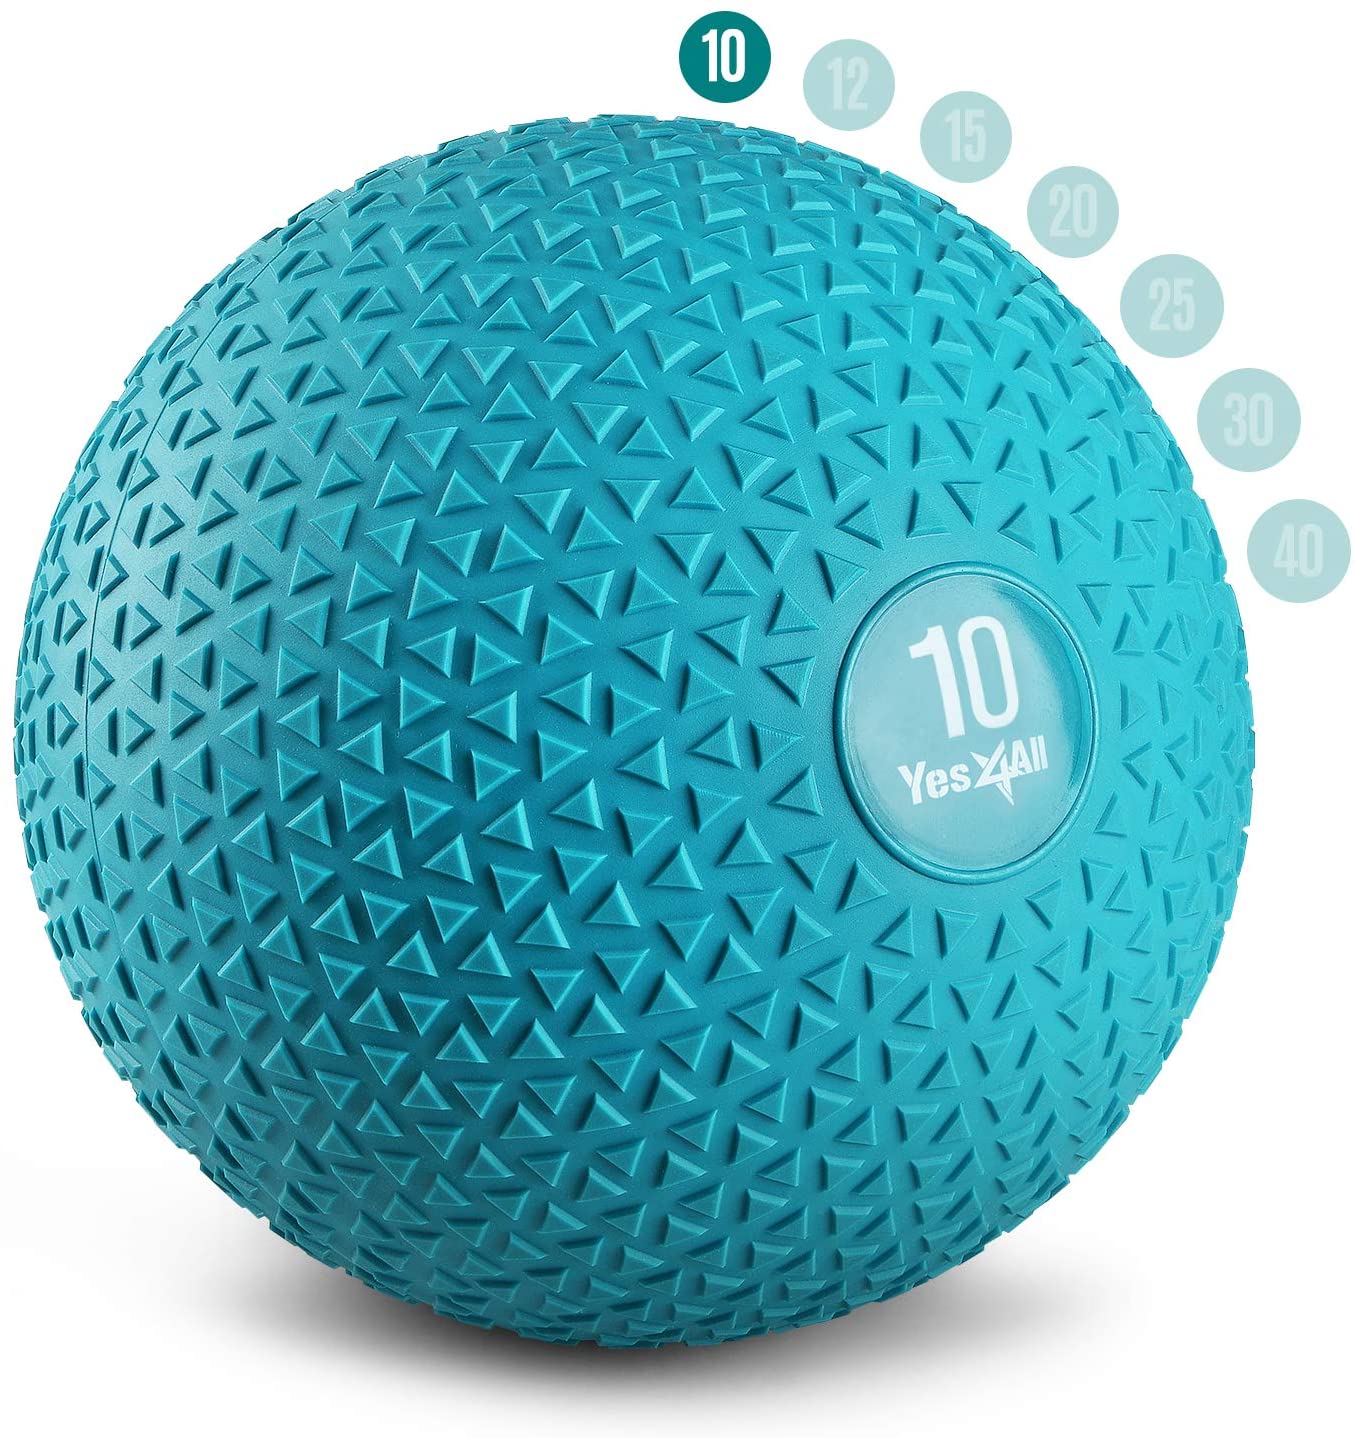 Yes4All 10lbs Slam Medicine Ball Triangle Teal - image 1 of 8